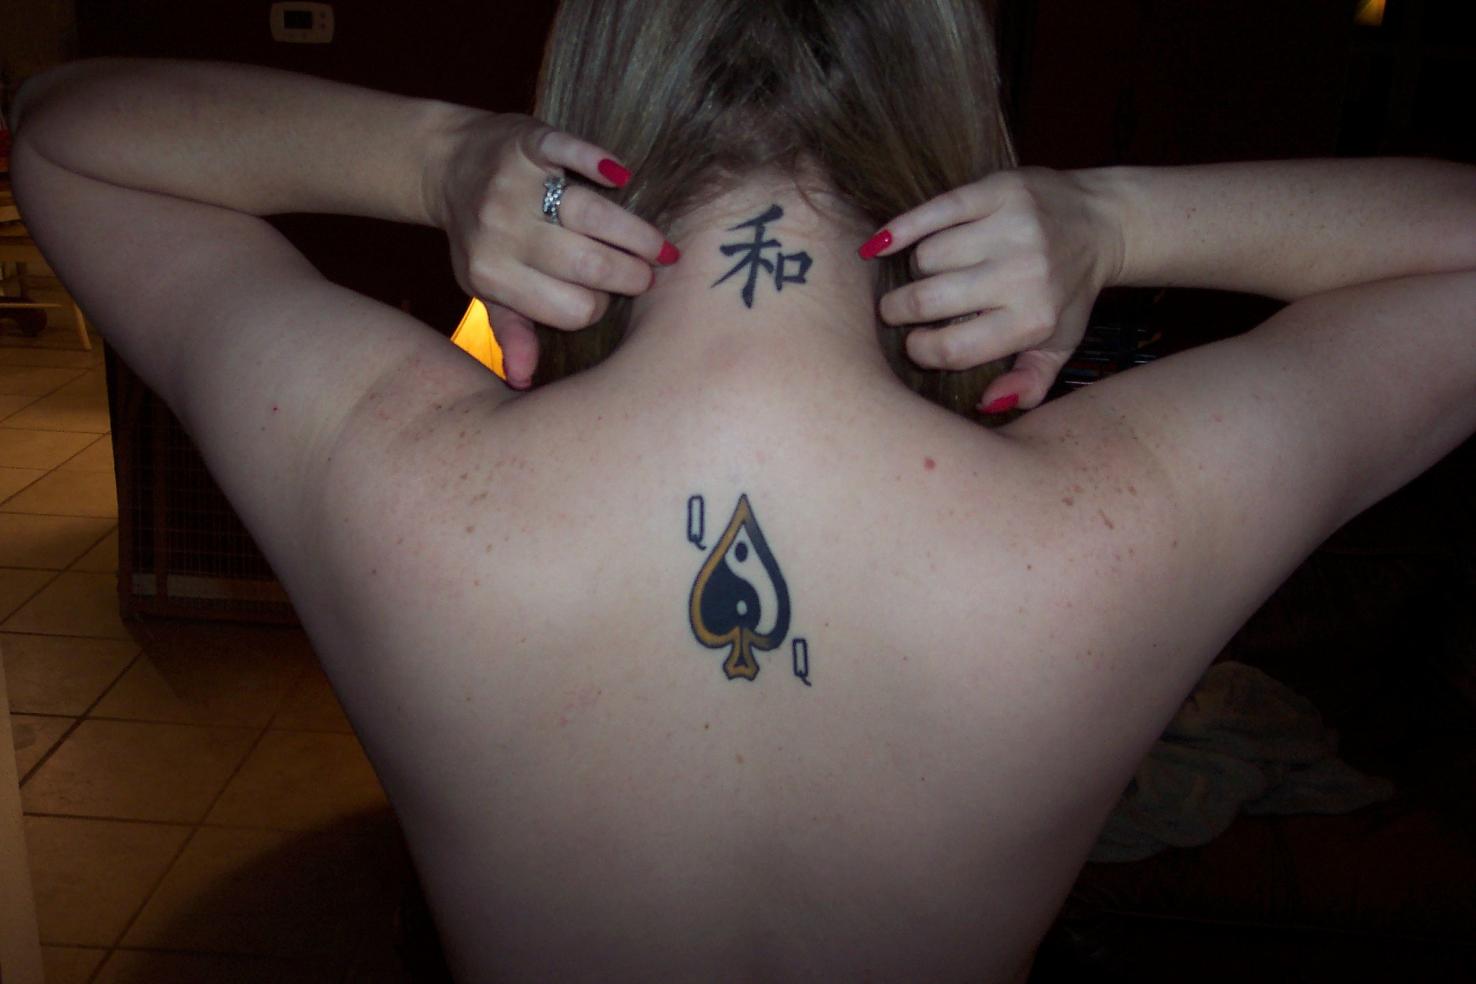 Interracial Forums - View Single Post - Queen of Spade Tattoo.